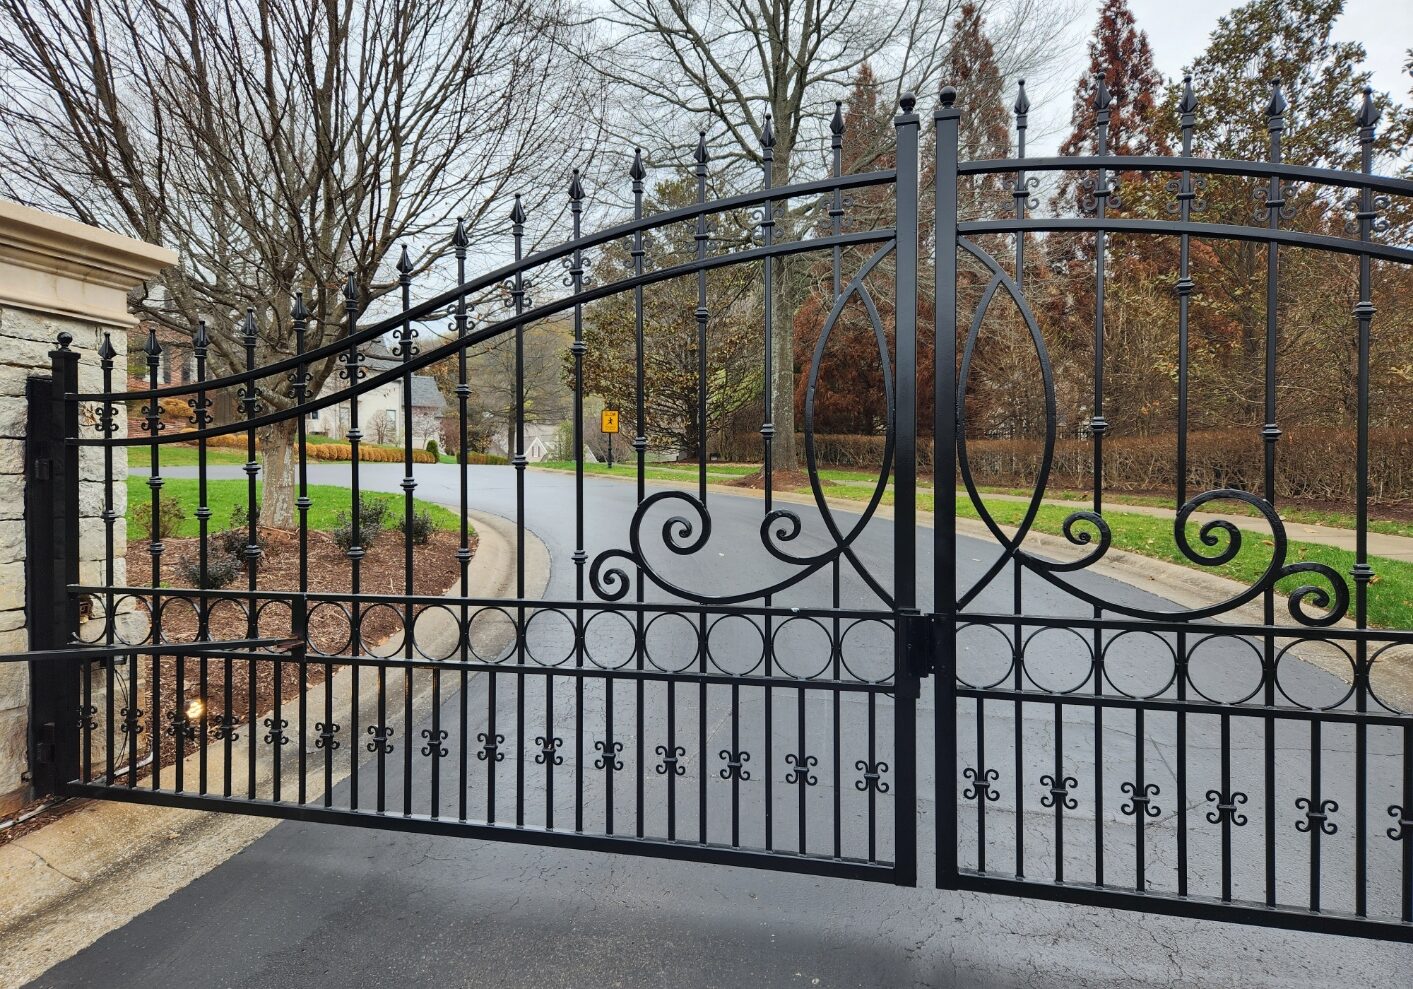 A driveway with a gate and trees in the background.